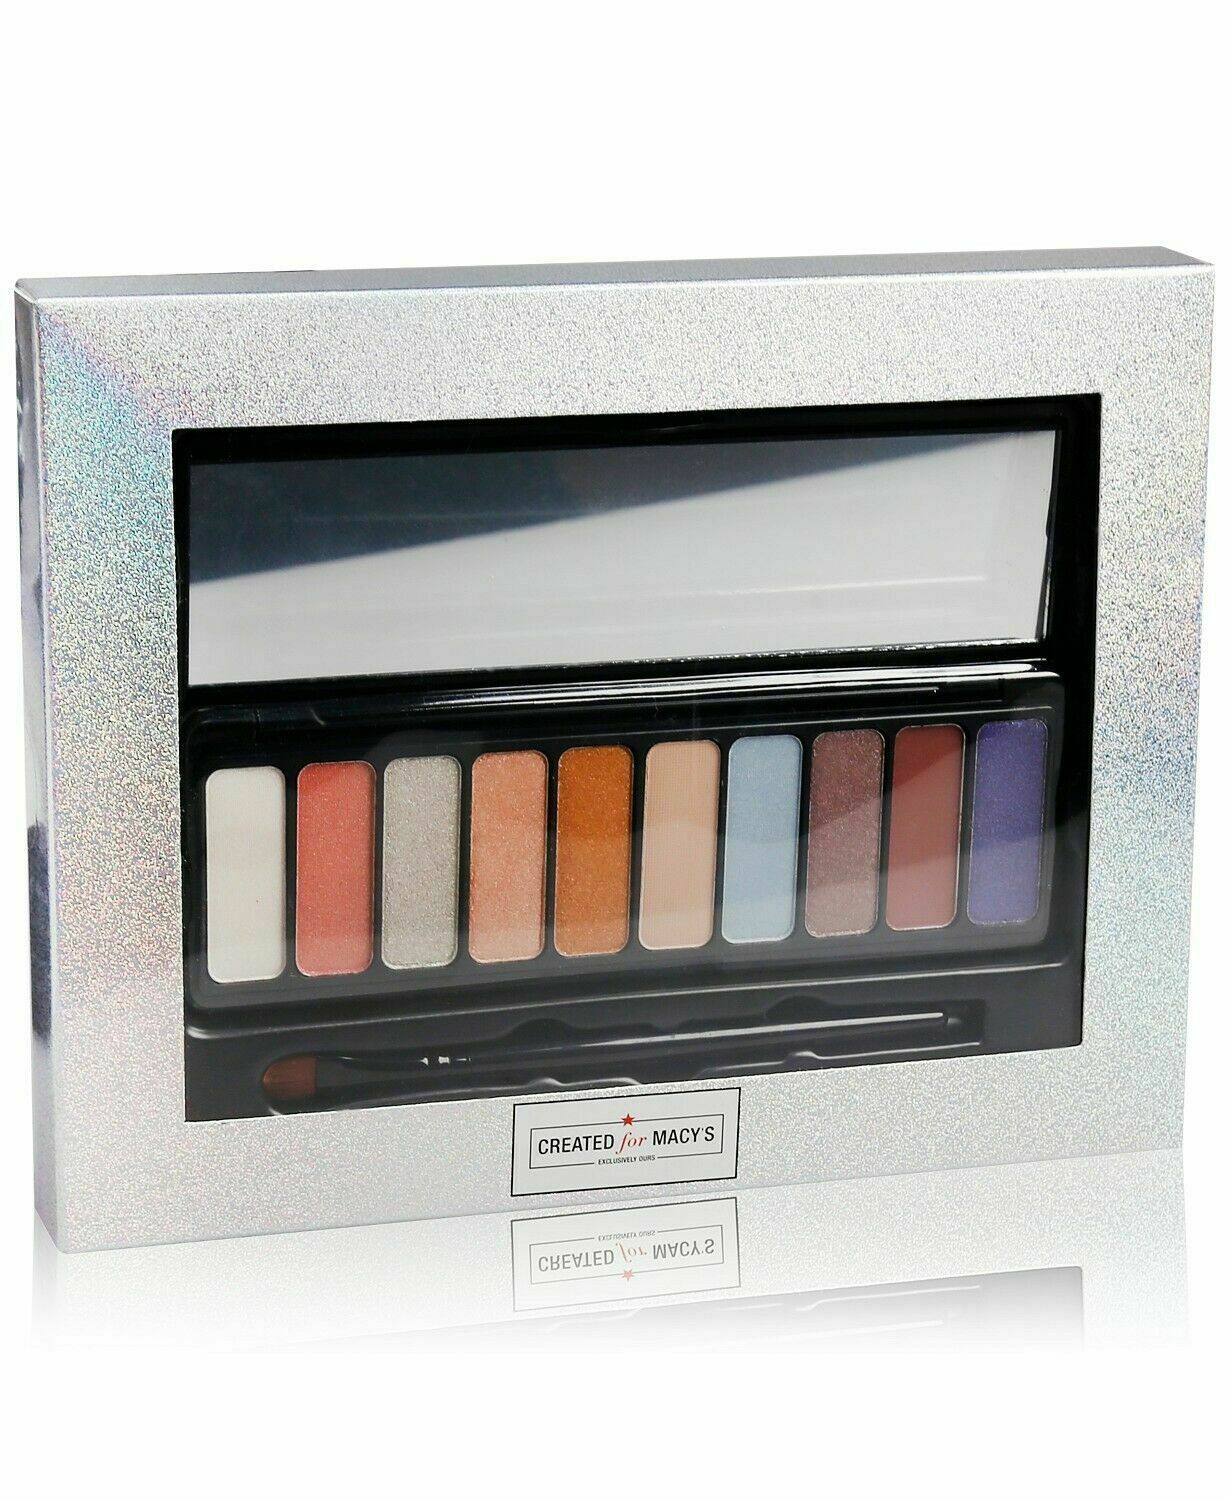 Galaxy Dust for Macy's 10 Eyeshadow Shades & Brush Palette - Lot of 7 GIFT IDEA - $55.00